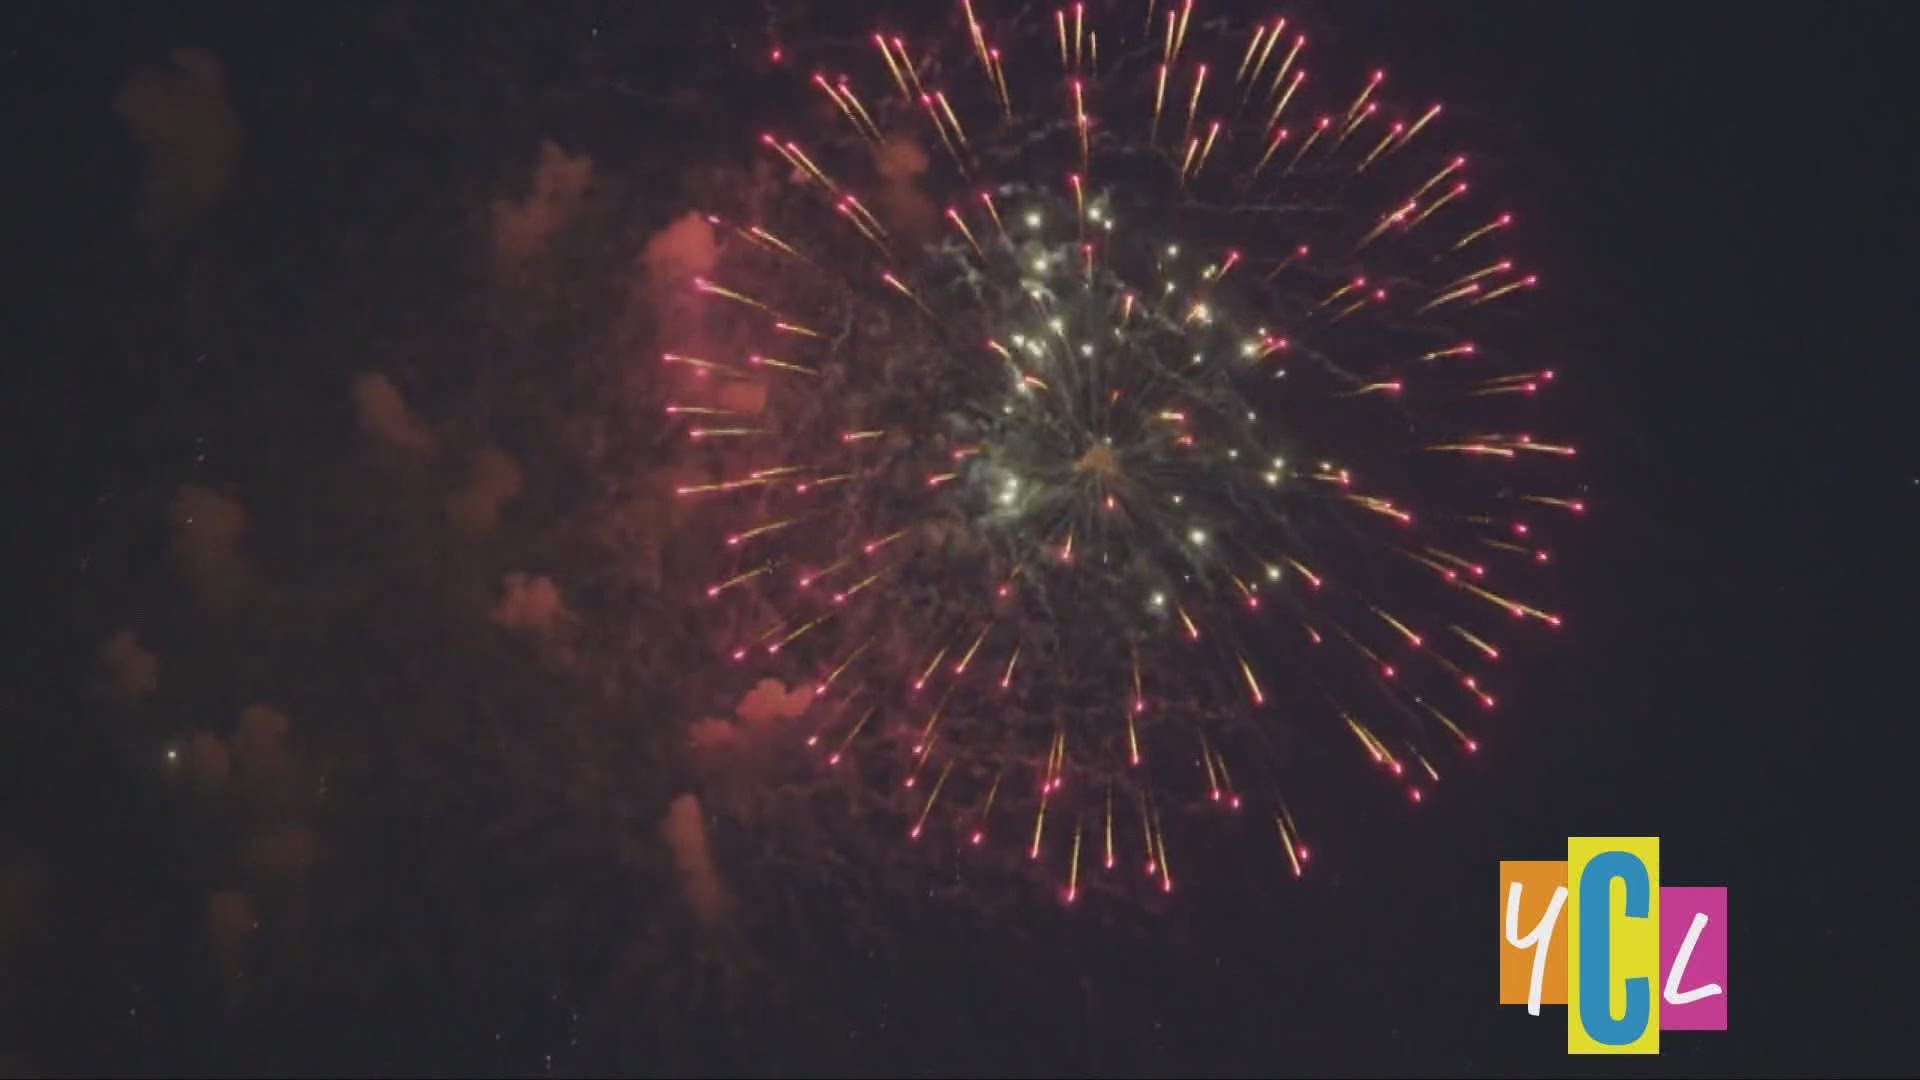 Elk Grove will salute the red, white, and blue, with a July 4th fireworks display from a secret location. Jodie Moreno explains what the community can expect.